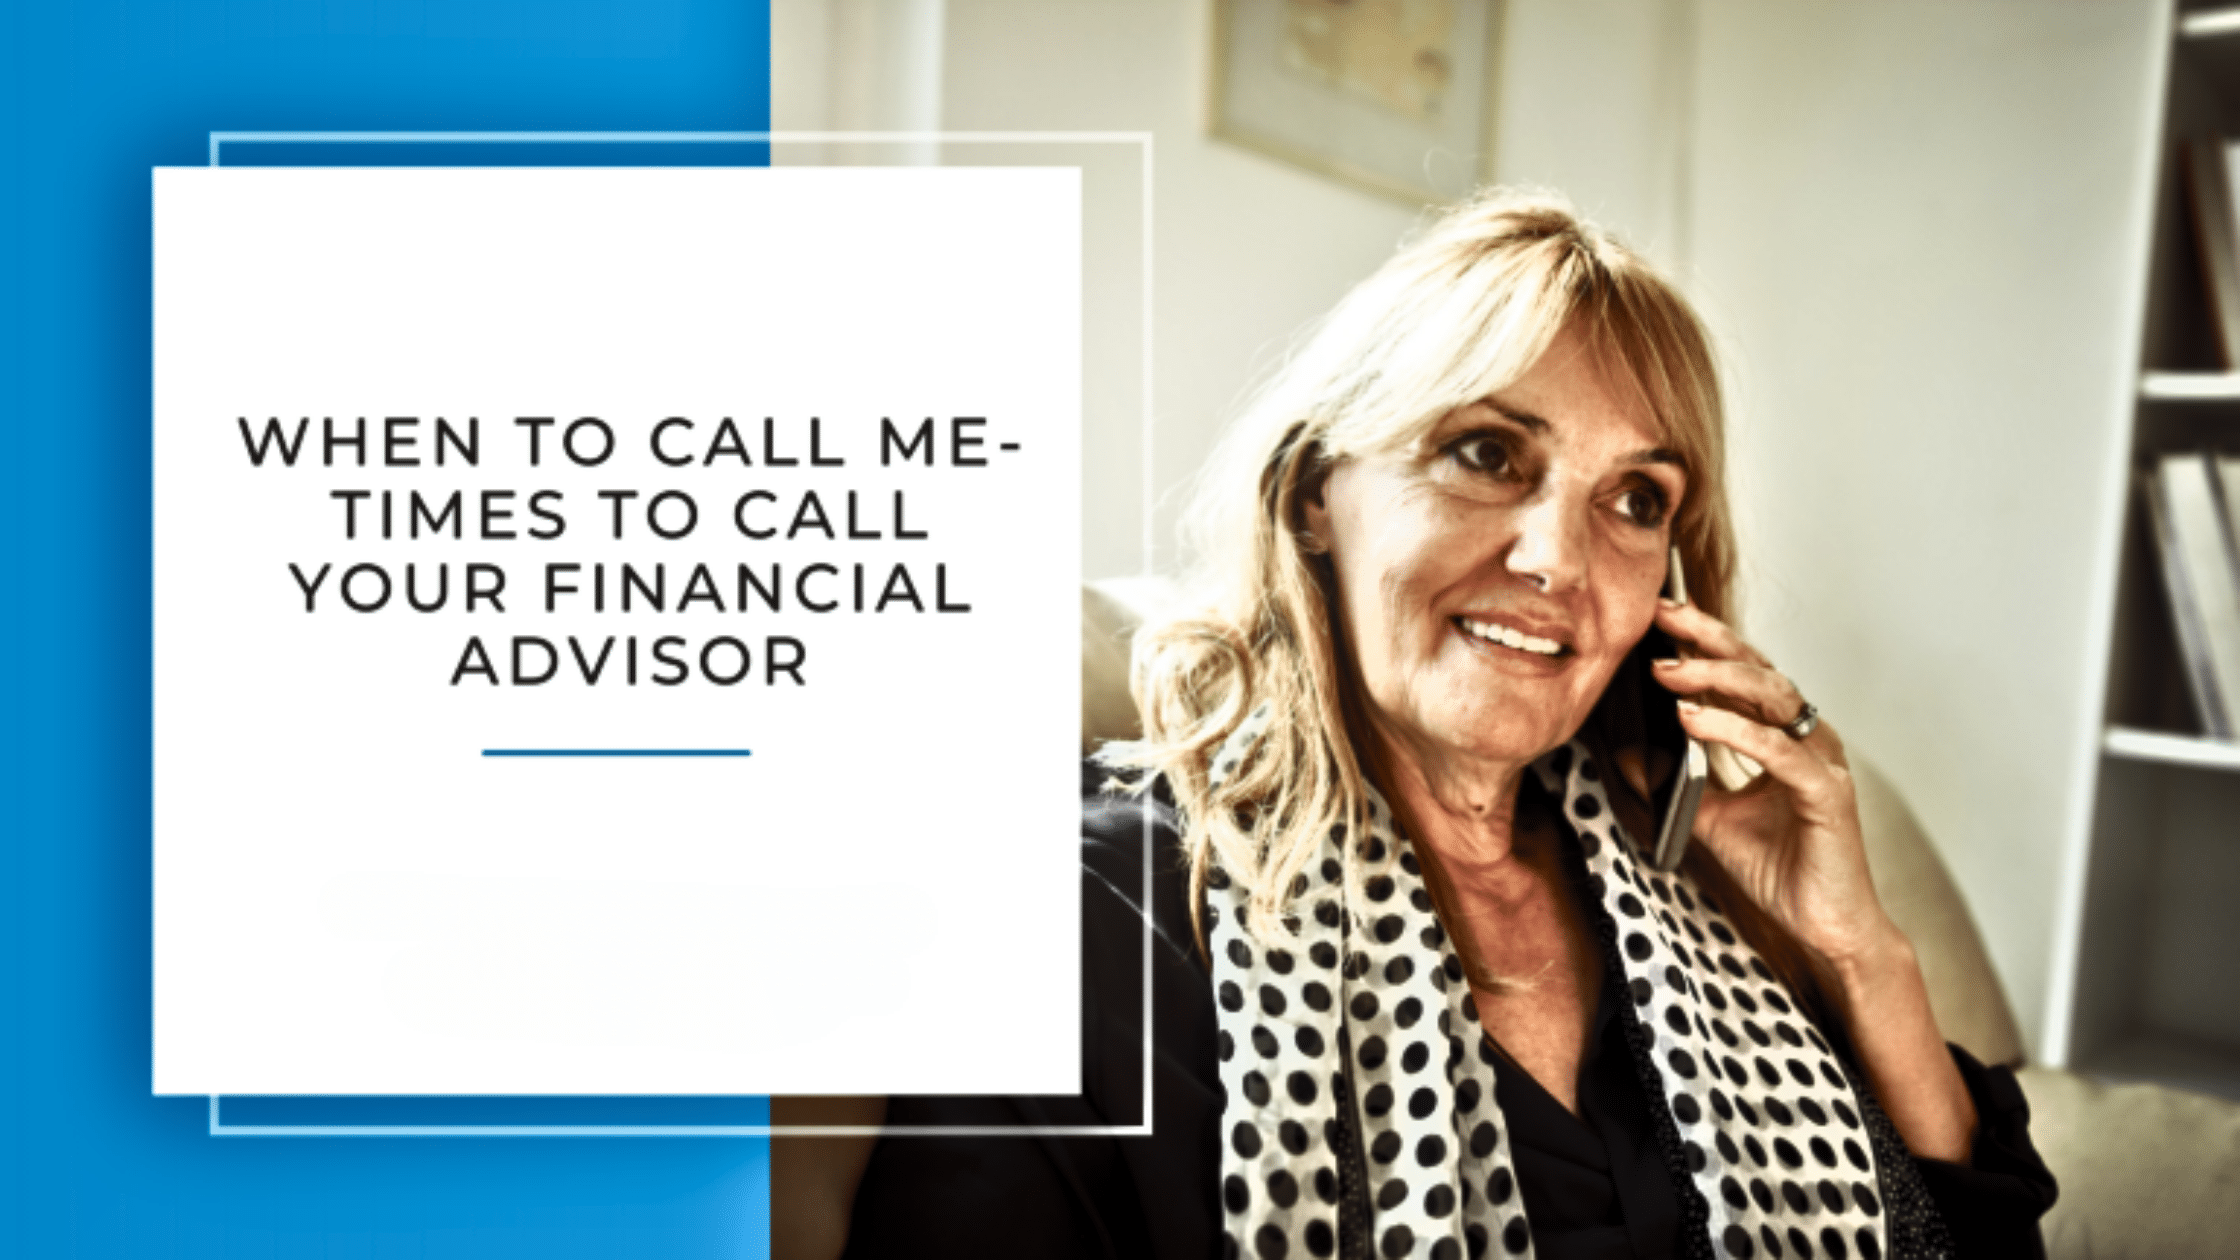 When to Call Me- Times to Call Your Financial Advisor